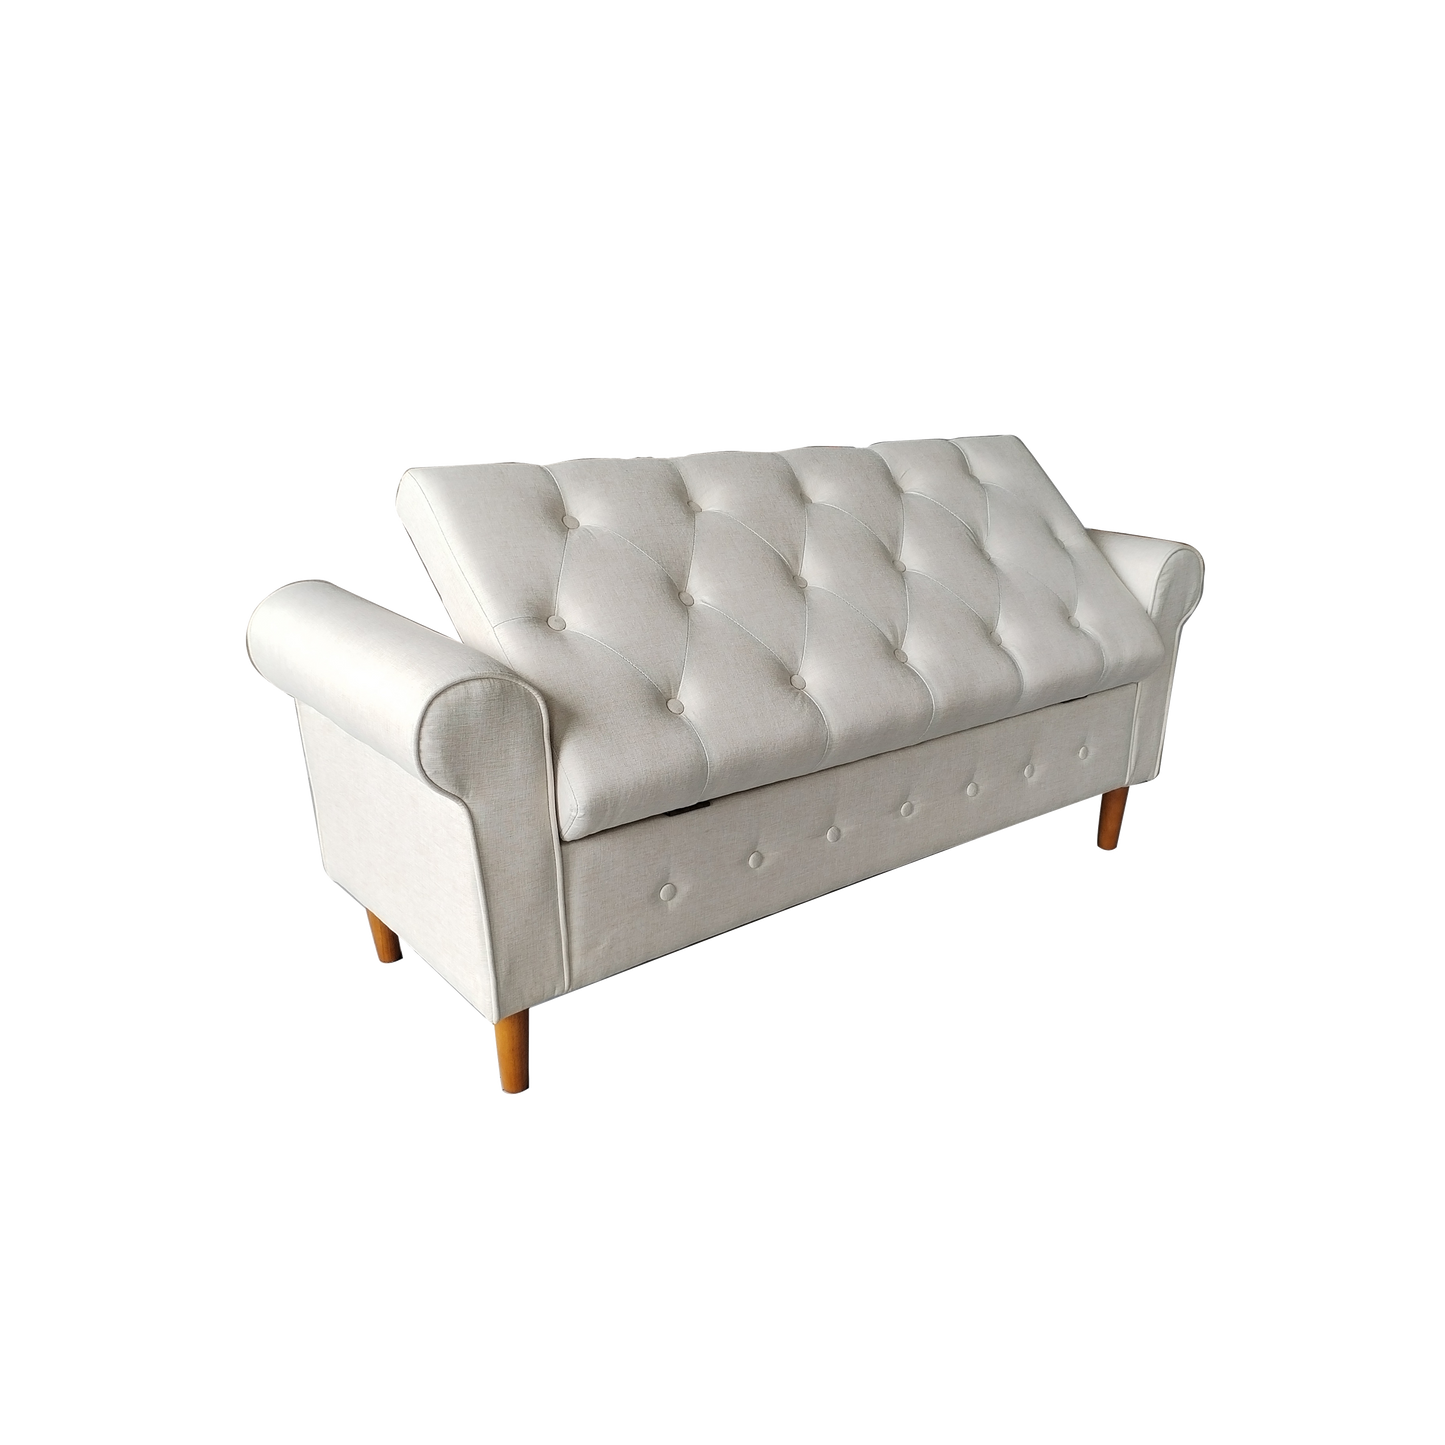 62" Bedroom Tufted Button Storage Bench